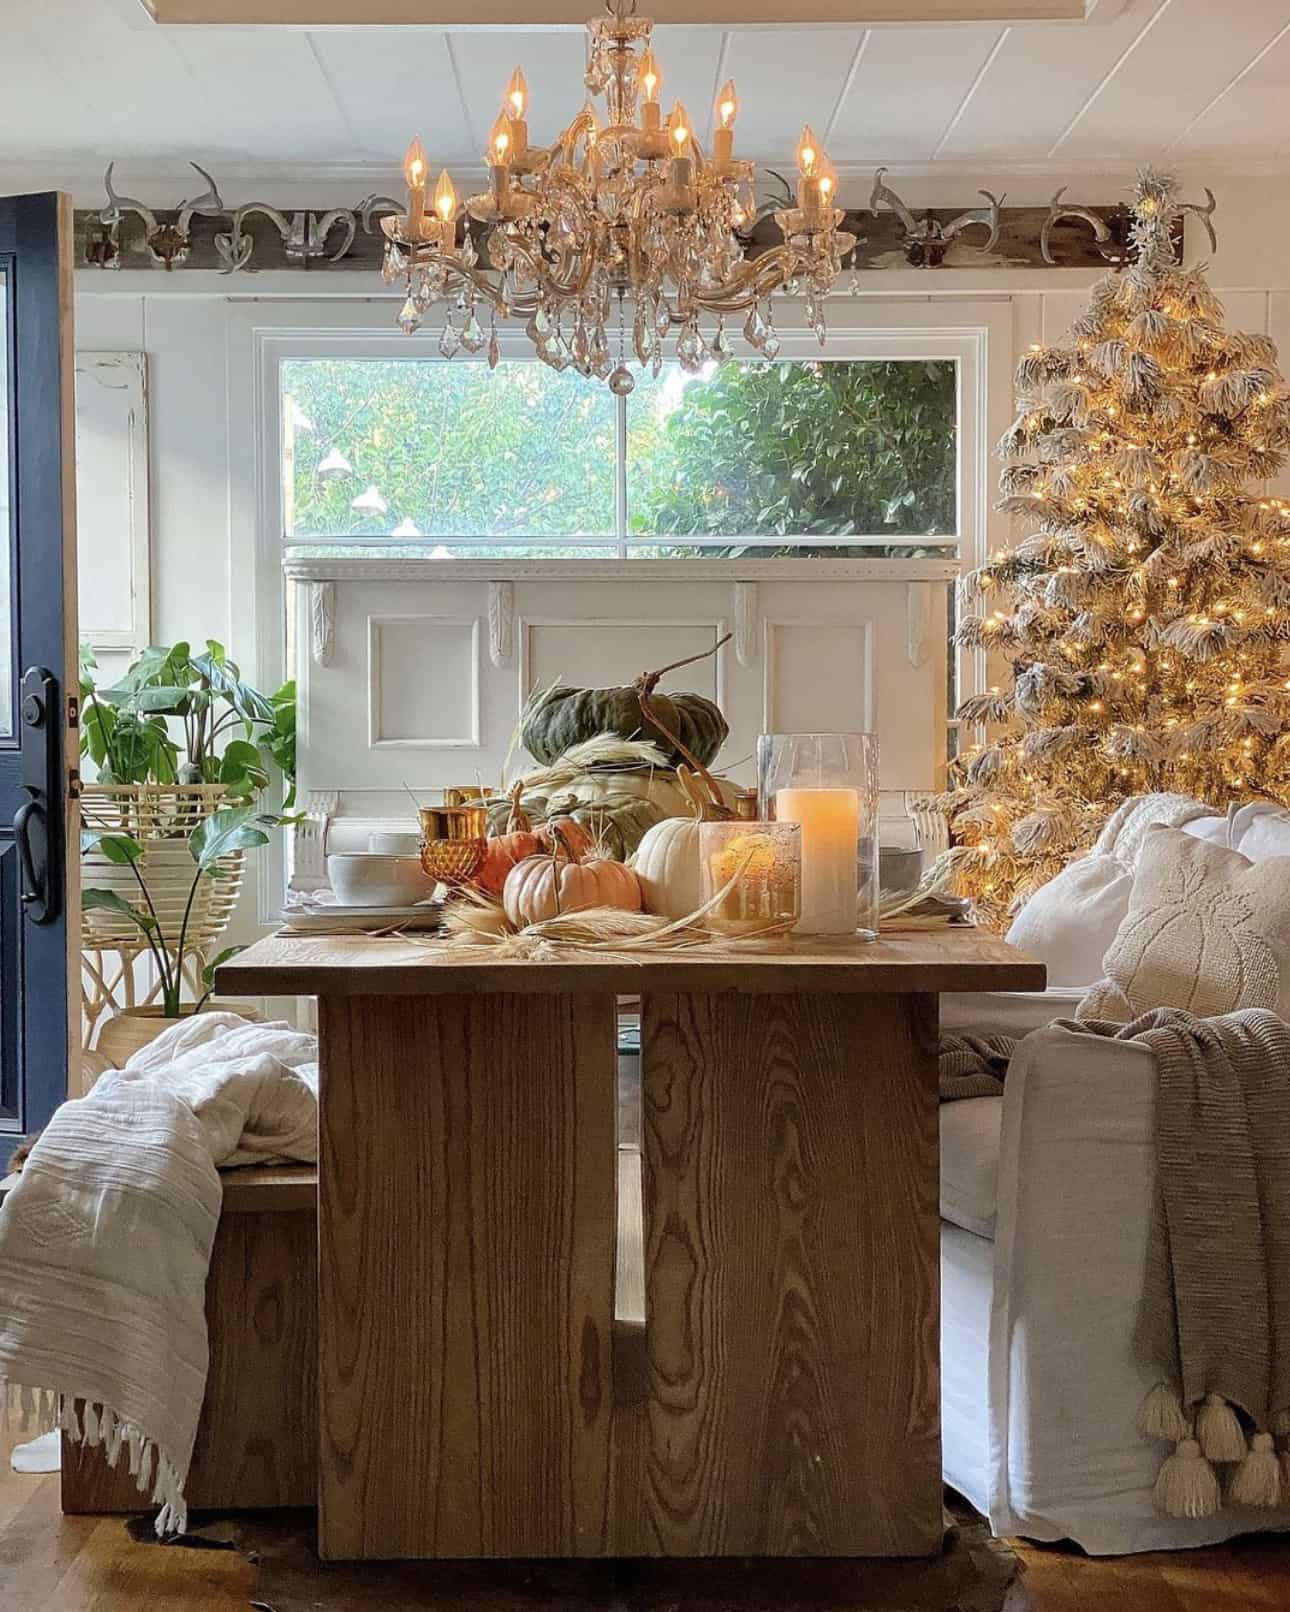 dining-table-styled-with-pumpkins-and-a-christmas-tree-in-the-background